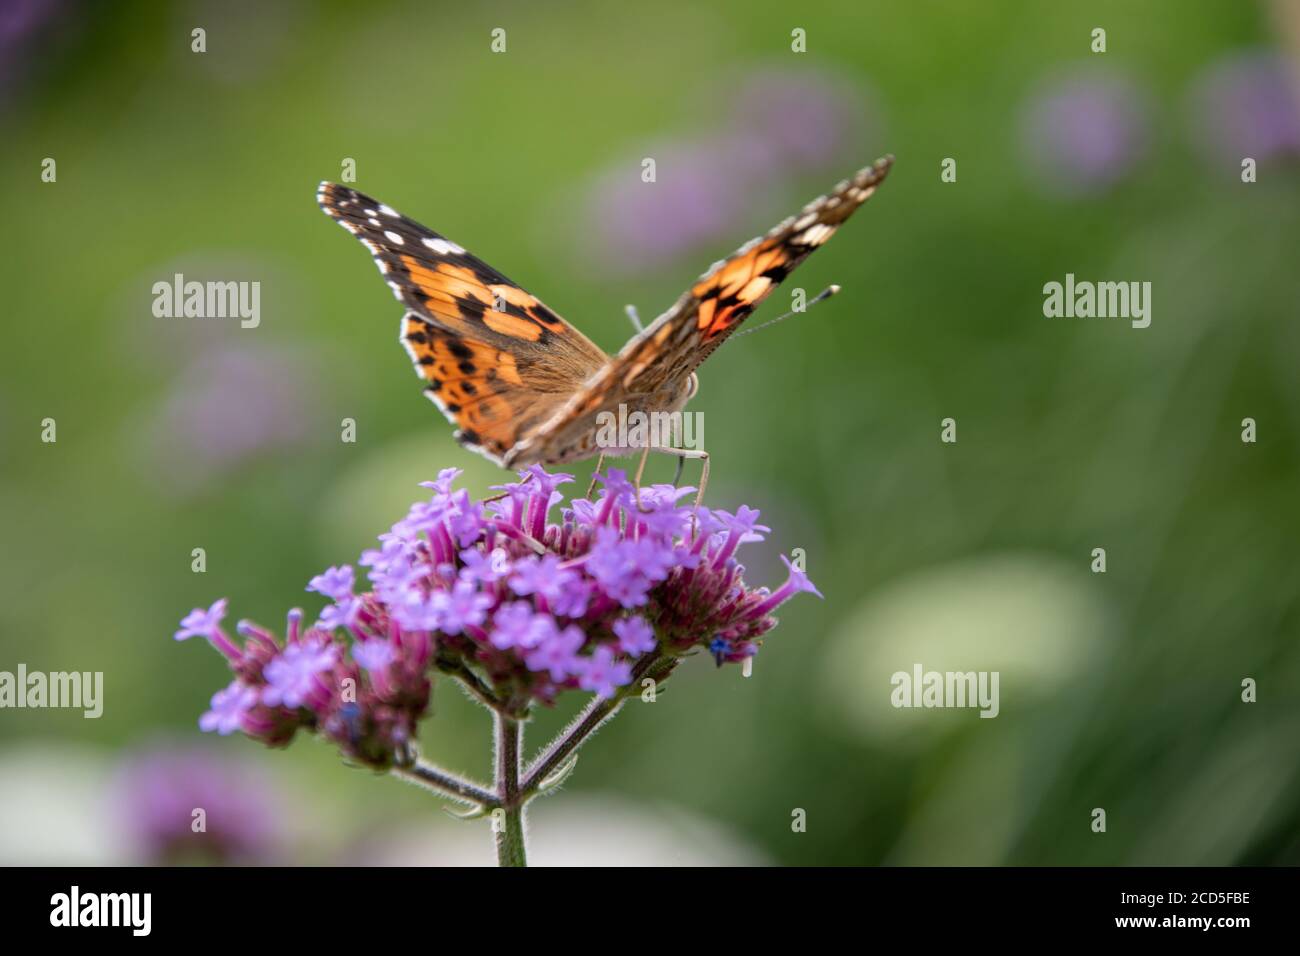 Beautiful shot of a butterfly sitting on Purpletop Vervain flower Stock Photo